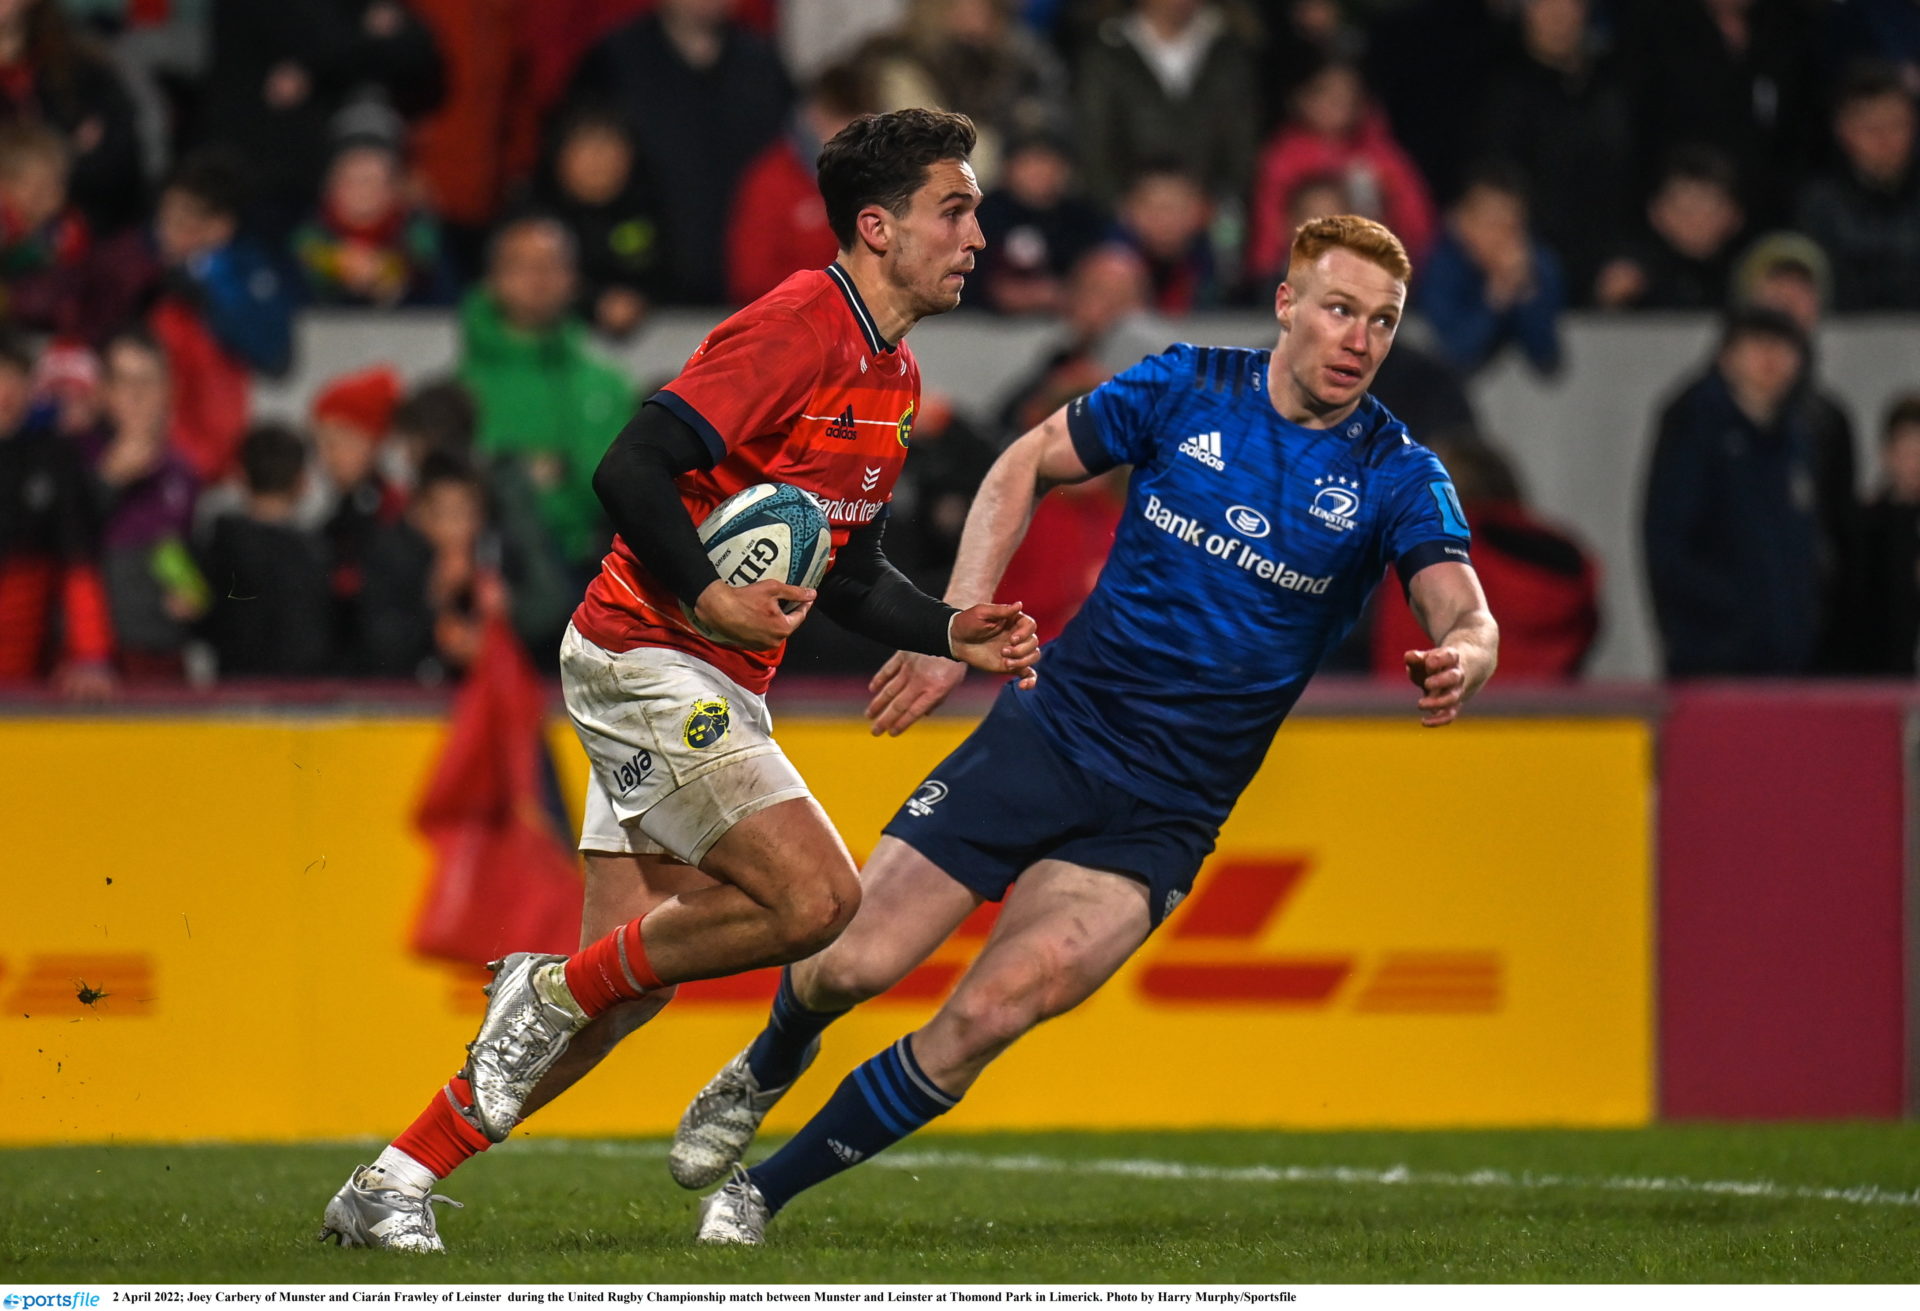 If this is a must win game for Munster I think theyve already lost season” Leinster v Ulster Preview on MNR Newstalk